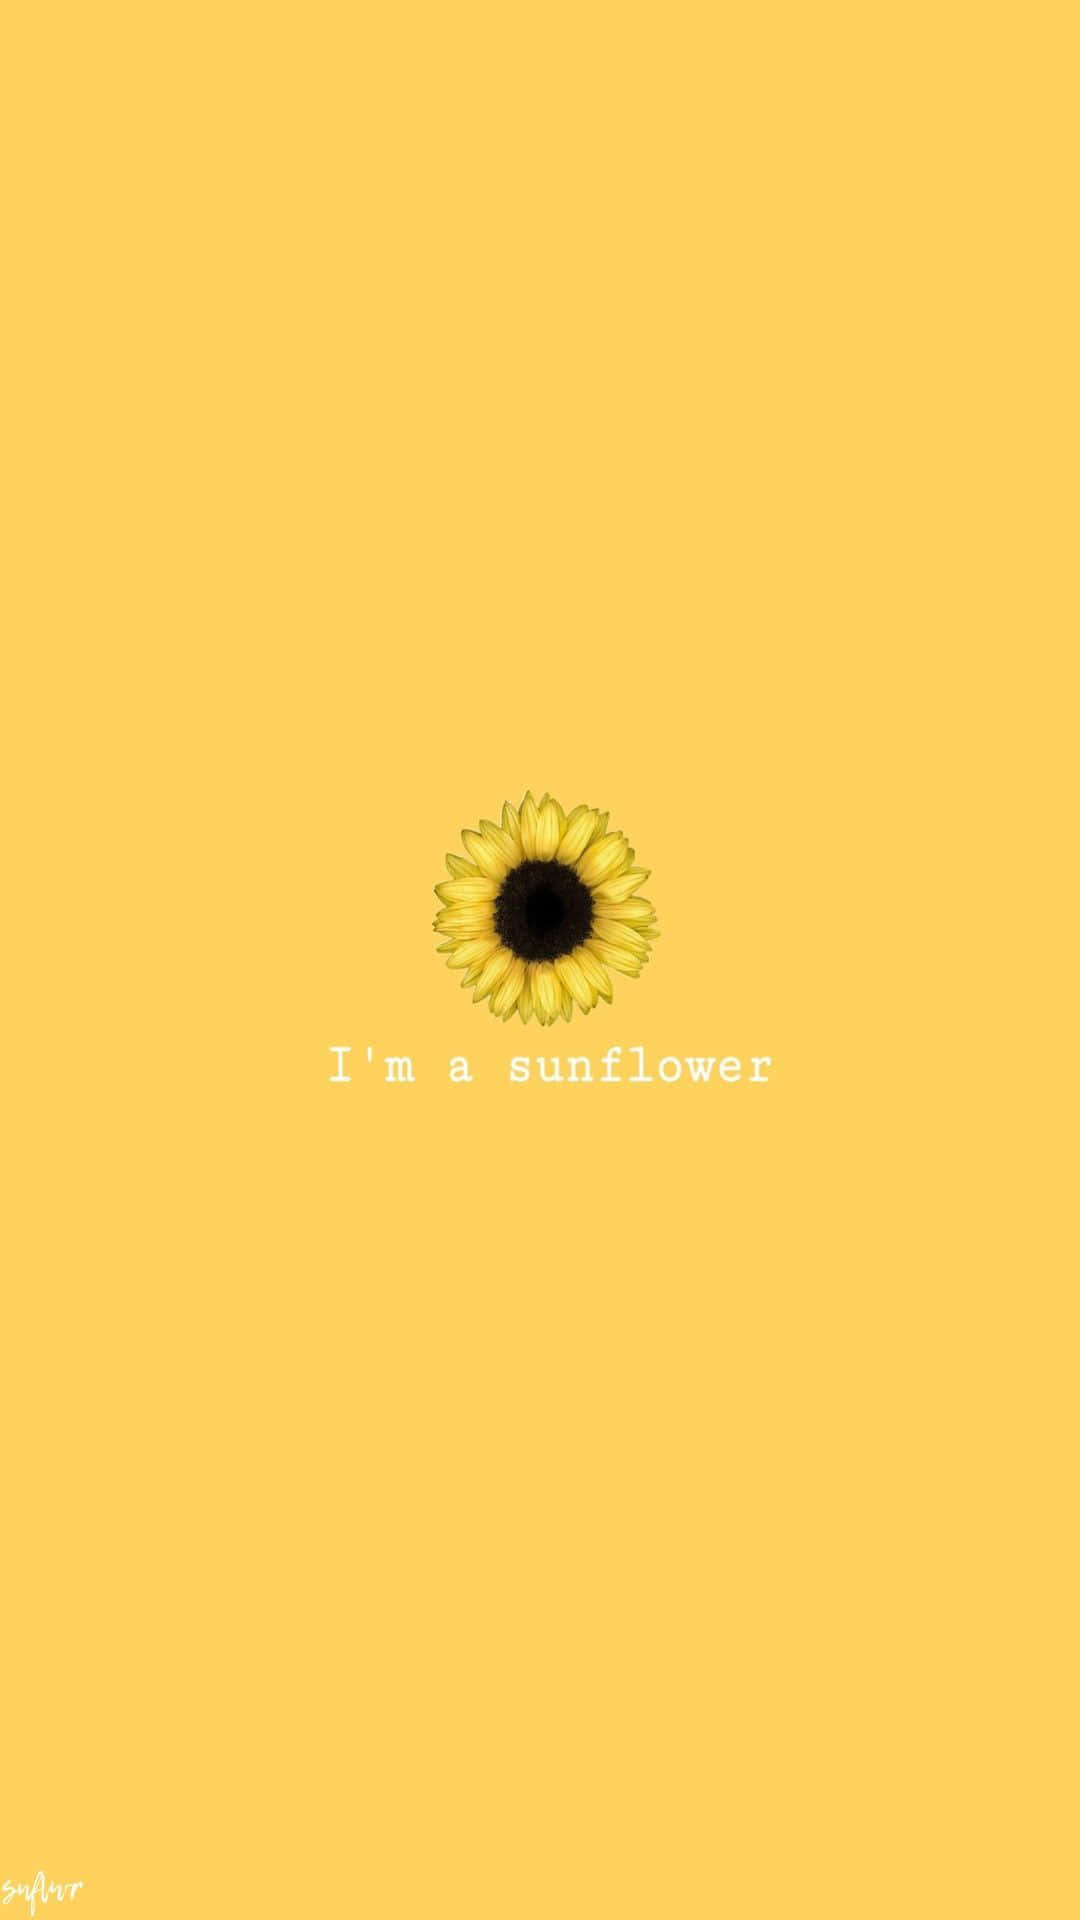 Aesthetic wallpaper of a sunflower with the words 